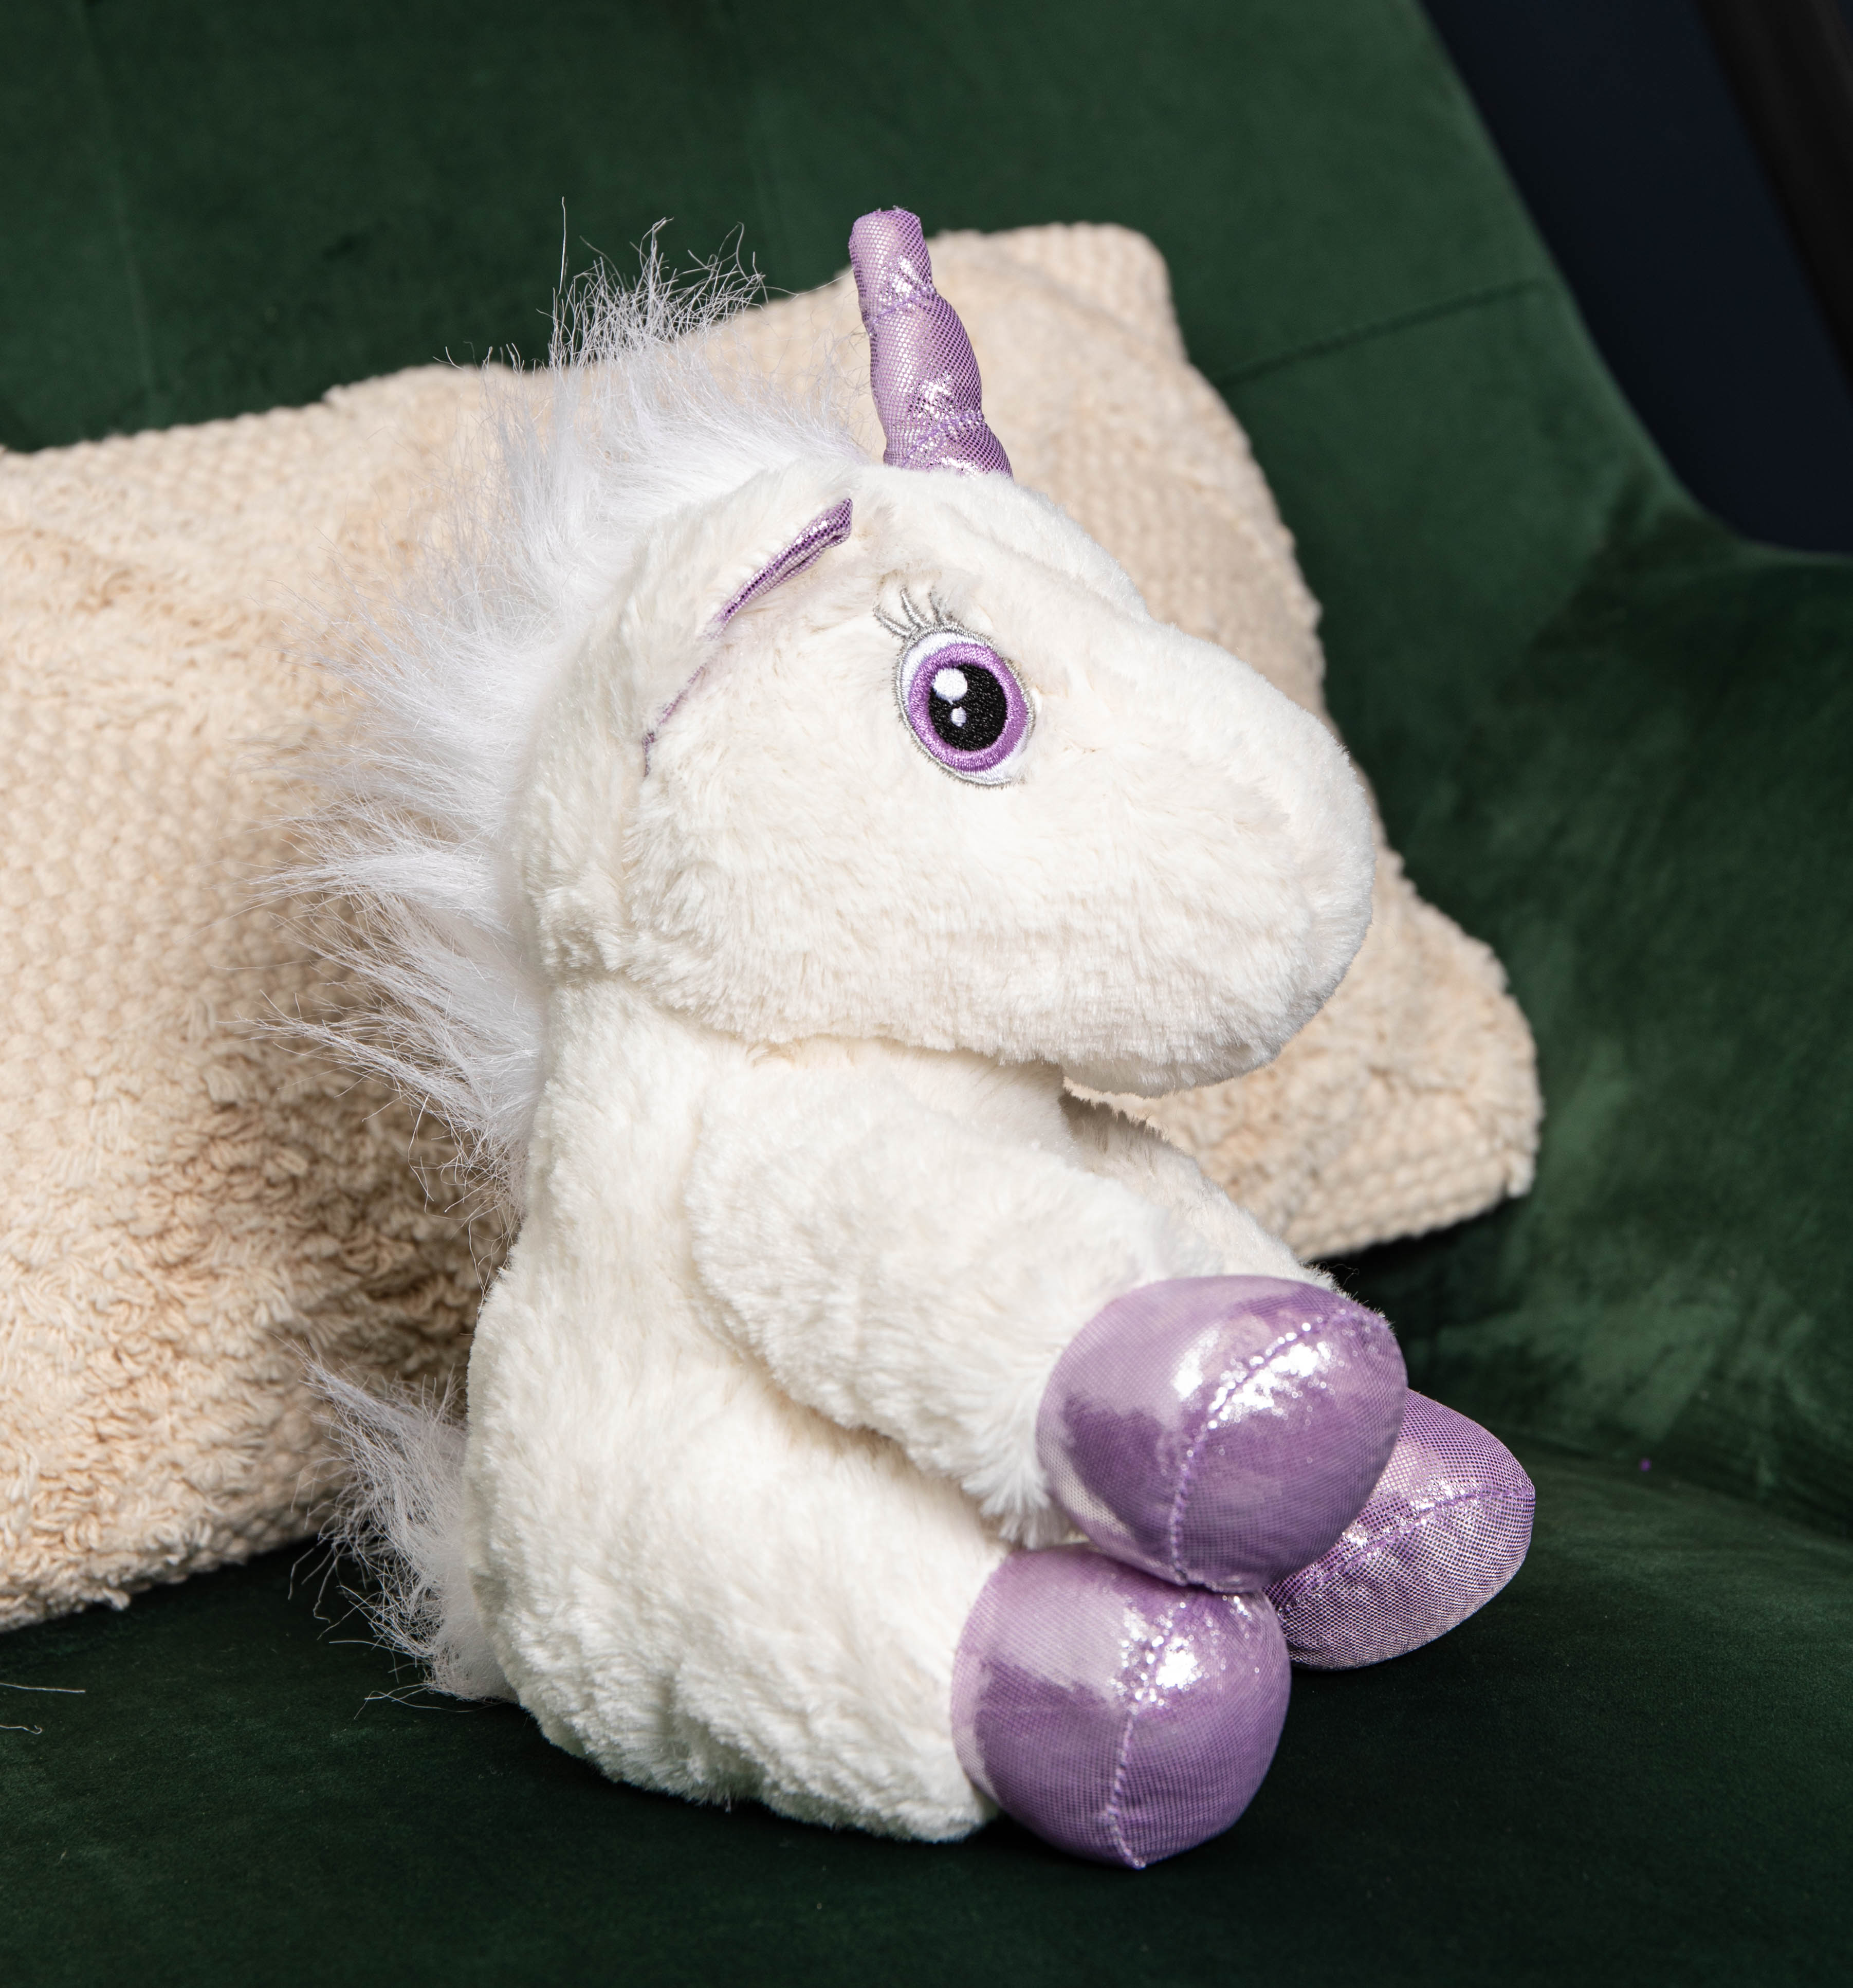 24cm Plush White Unicorn with Sparkly Purple Horn and Hooves